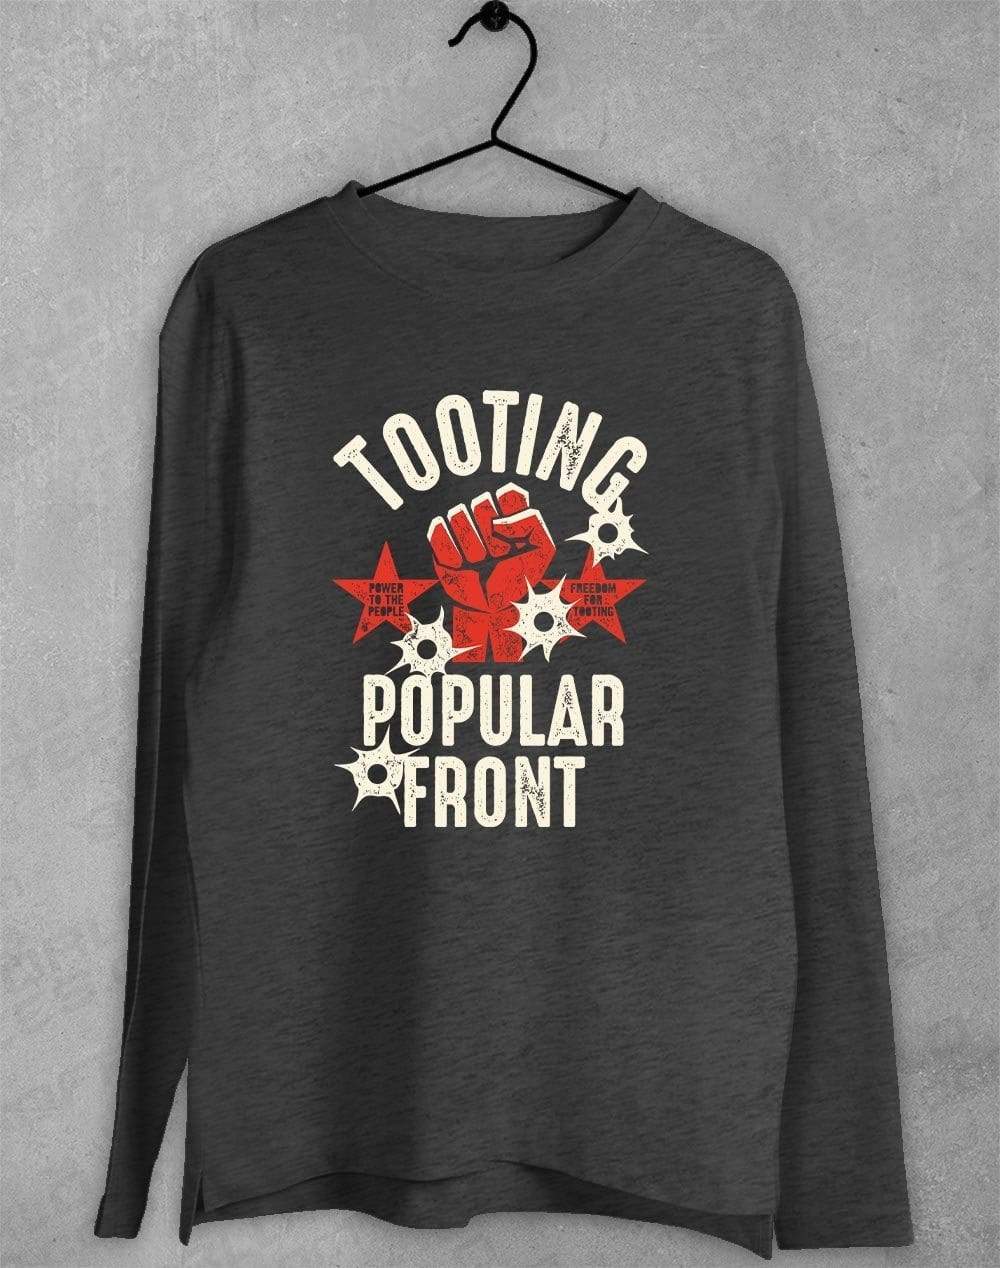 Tooting Popular Front Long Sleeve T-Shirt S / Dark Heather  - Off World Tees